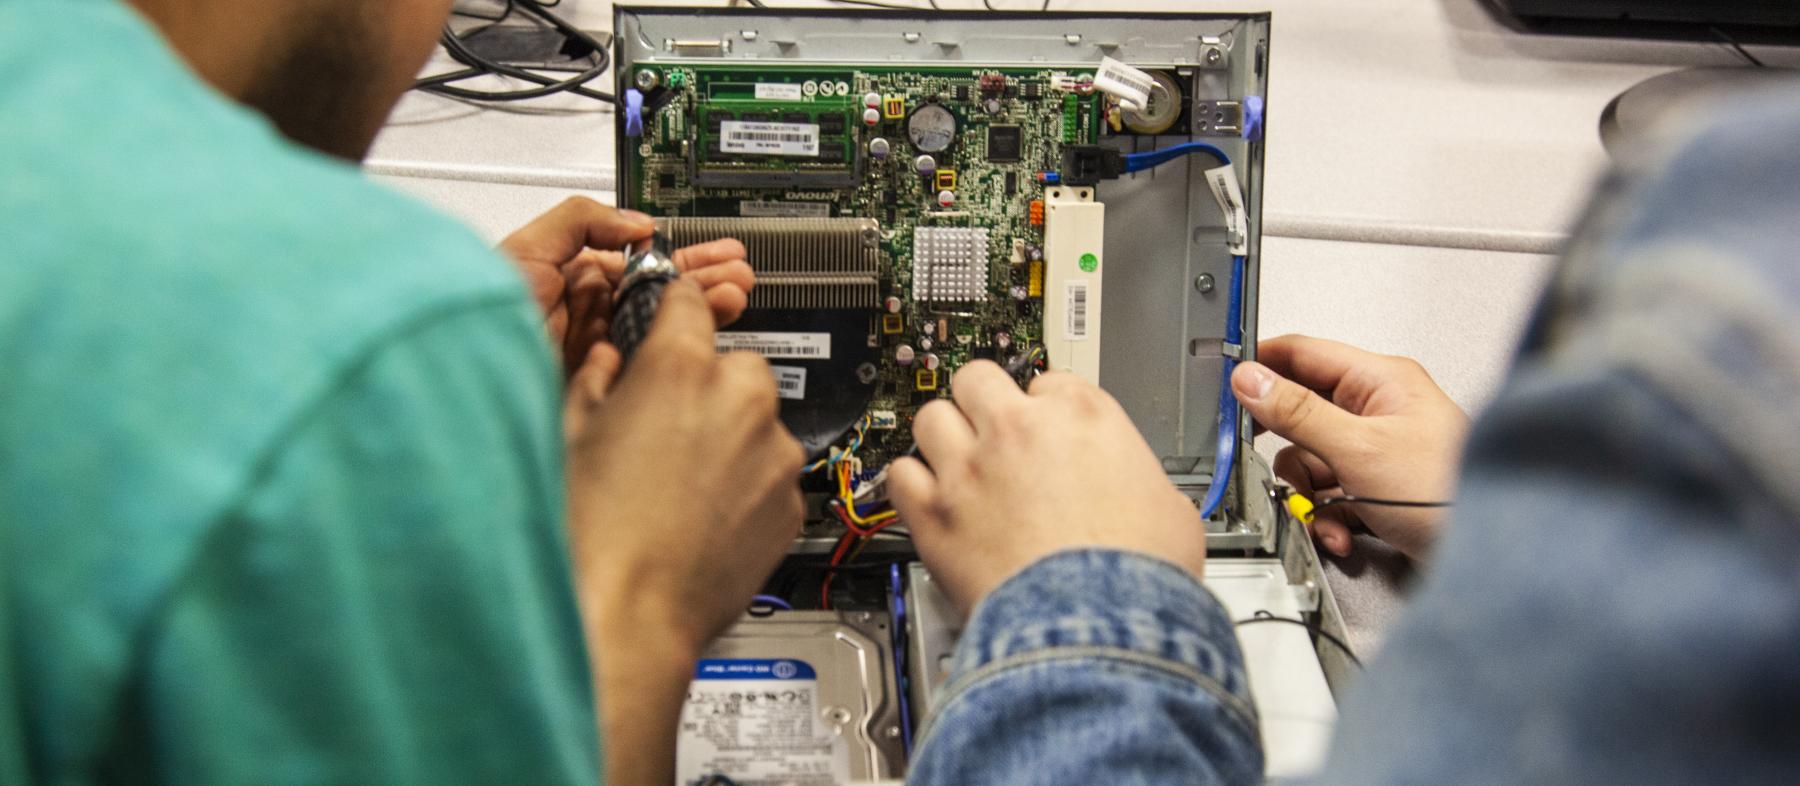 Students work on internal computer components in a lab